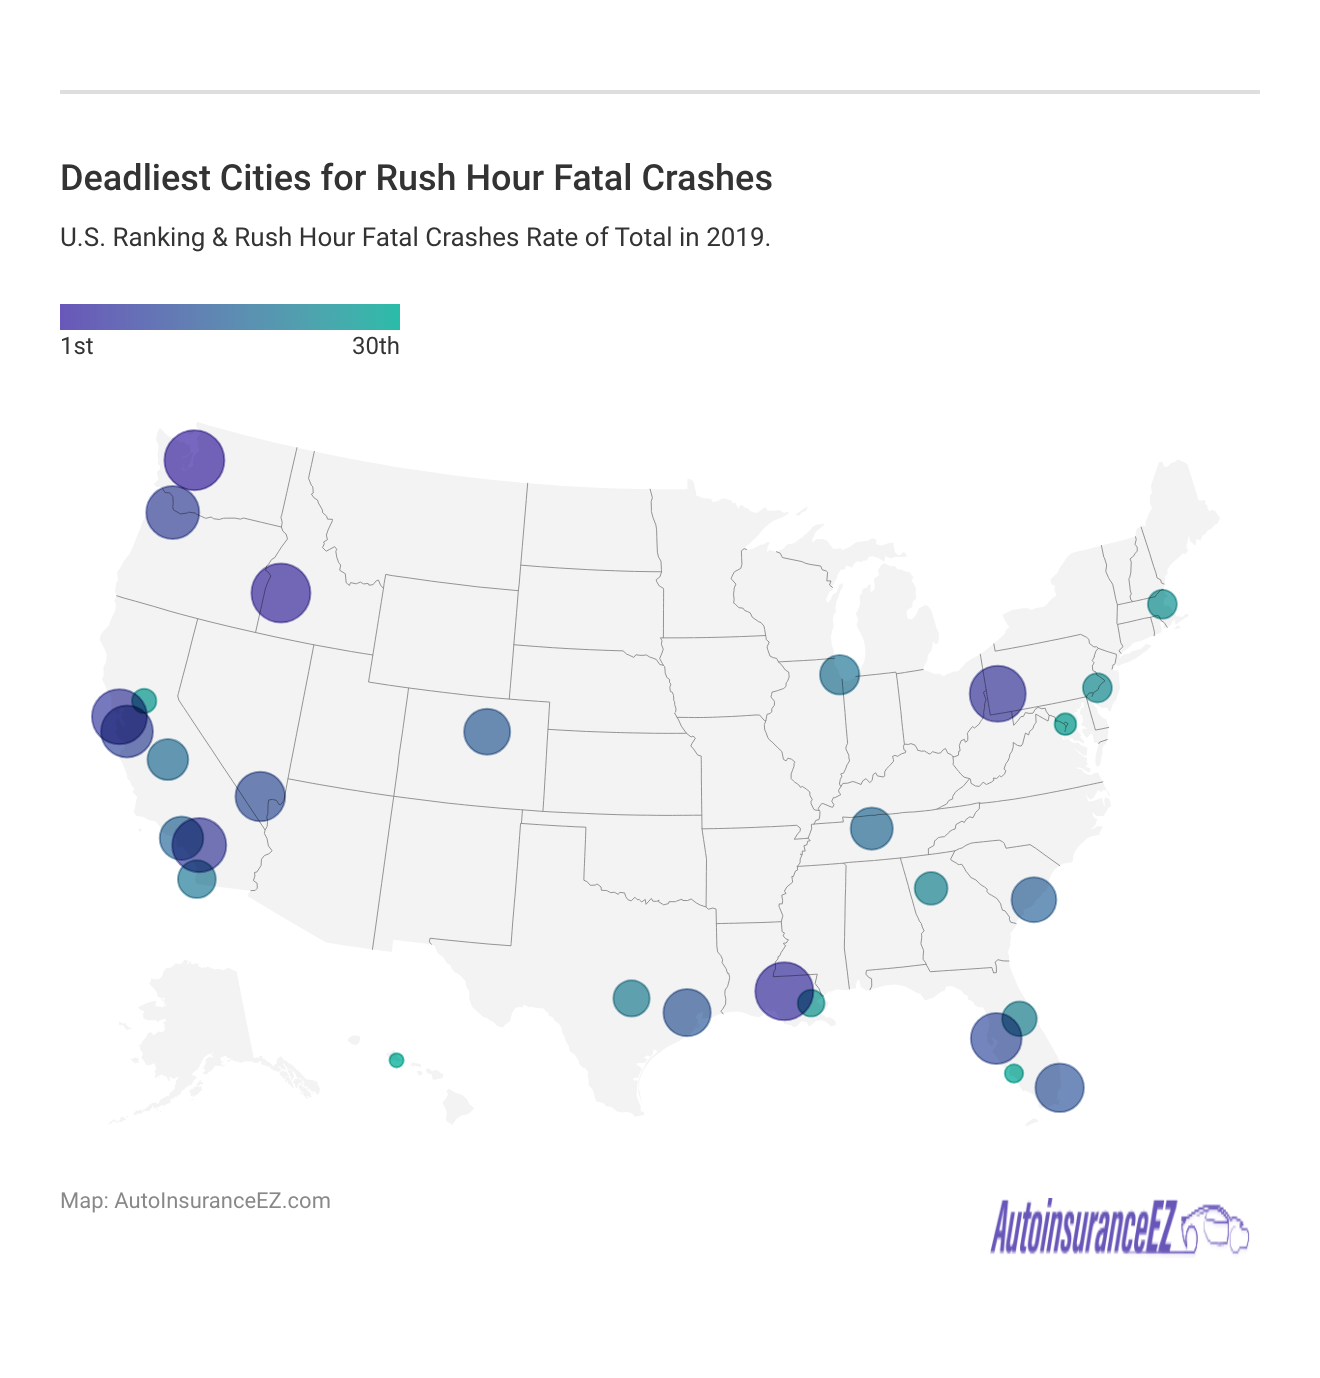 <h3>Deadliest Cities for Rush Hour Fatal Crashes</h3>